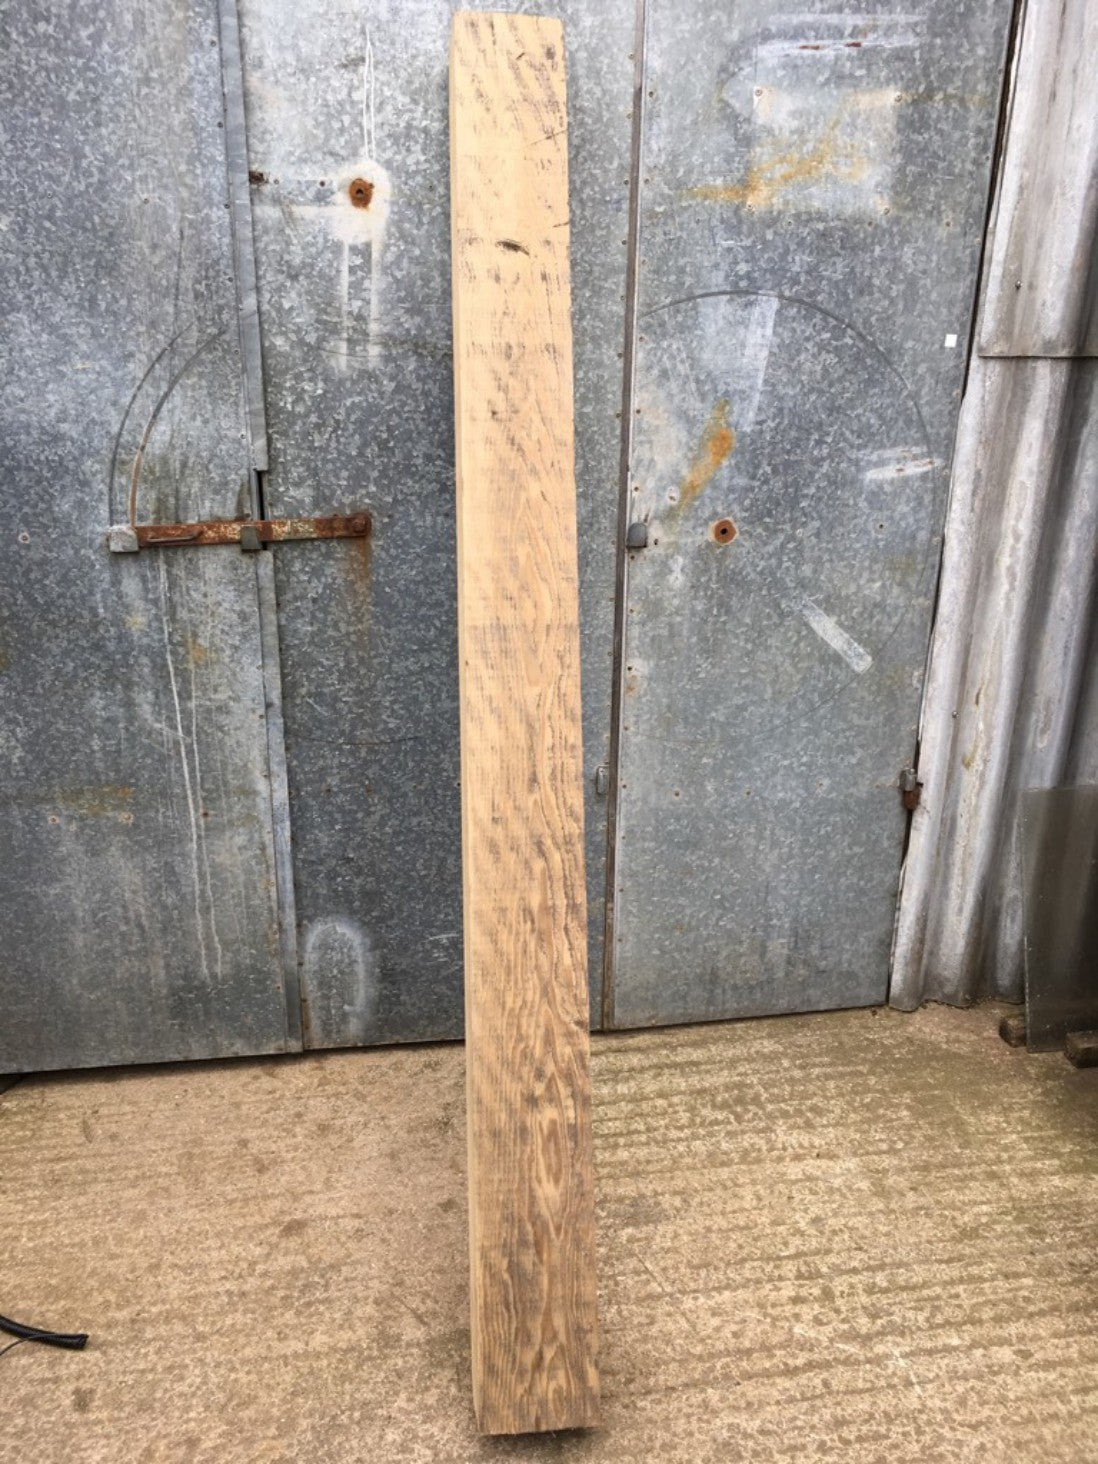 7ft 6 7/8" Or 2.31m Long Reclaimed Old Chunky Pine Beam